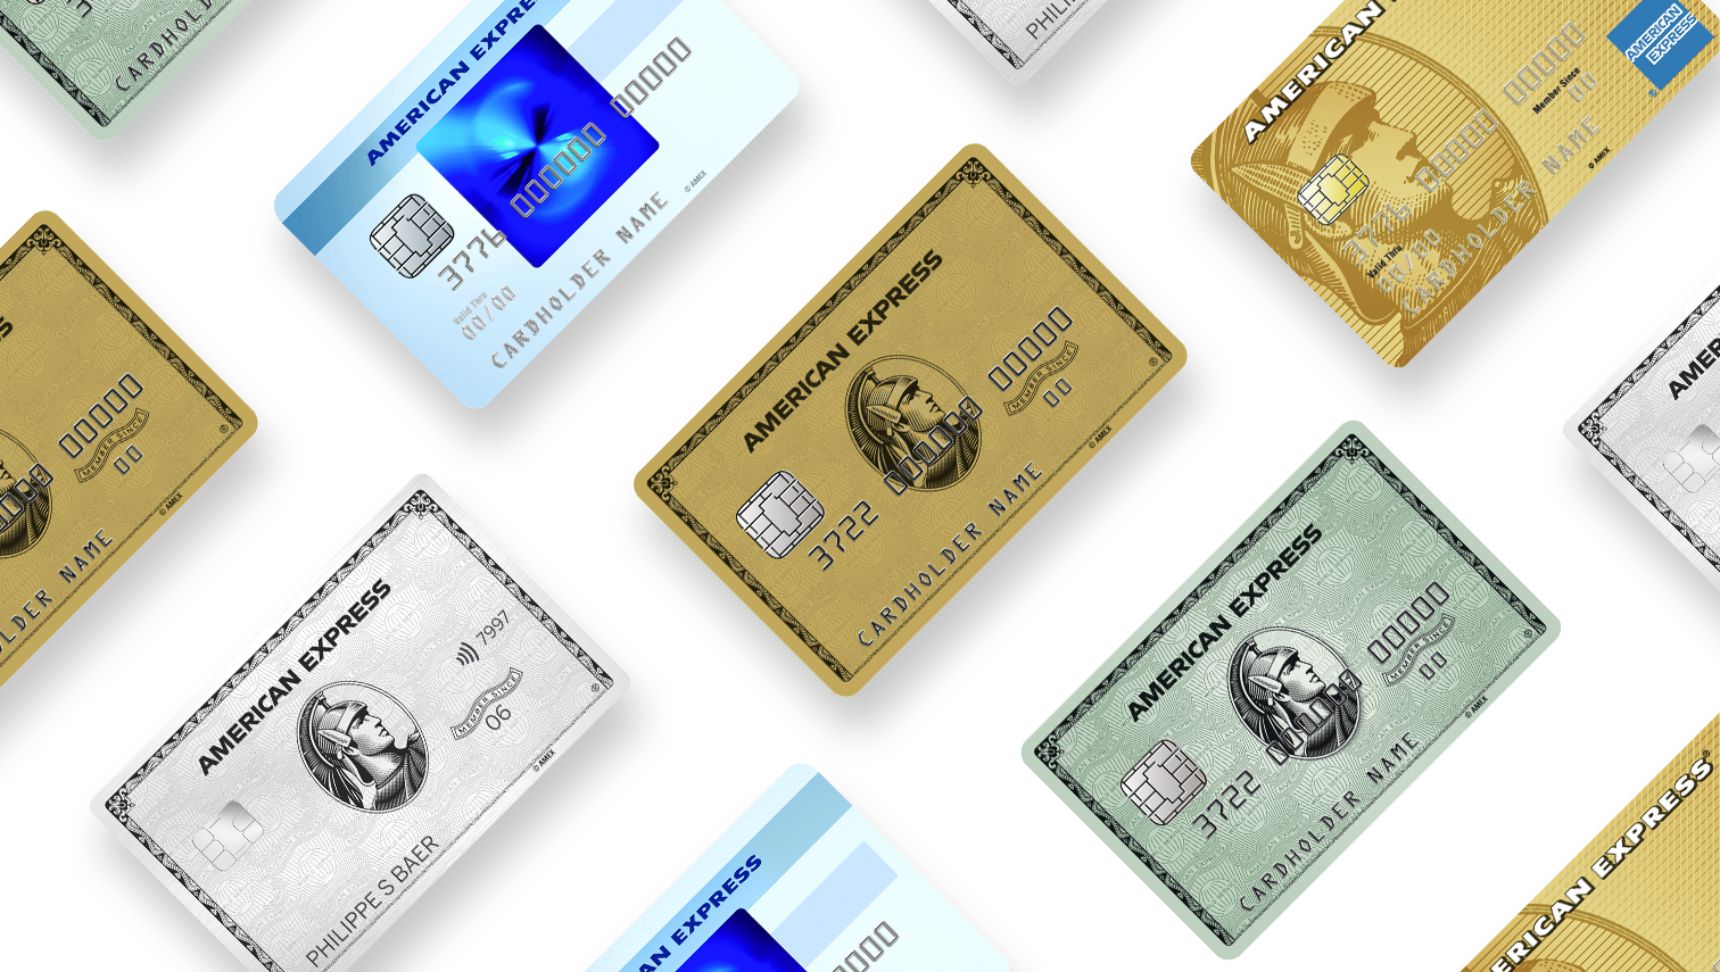 The American Express Credit Card collection available in the Netherlands